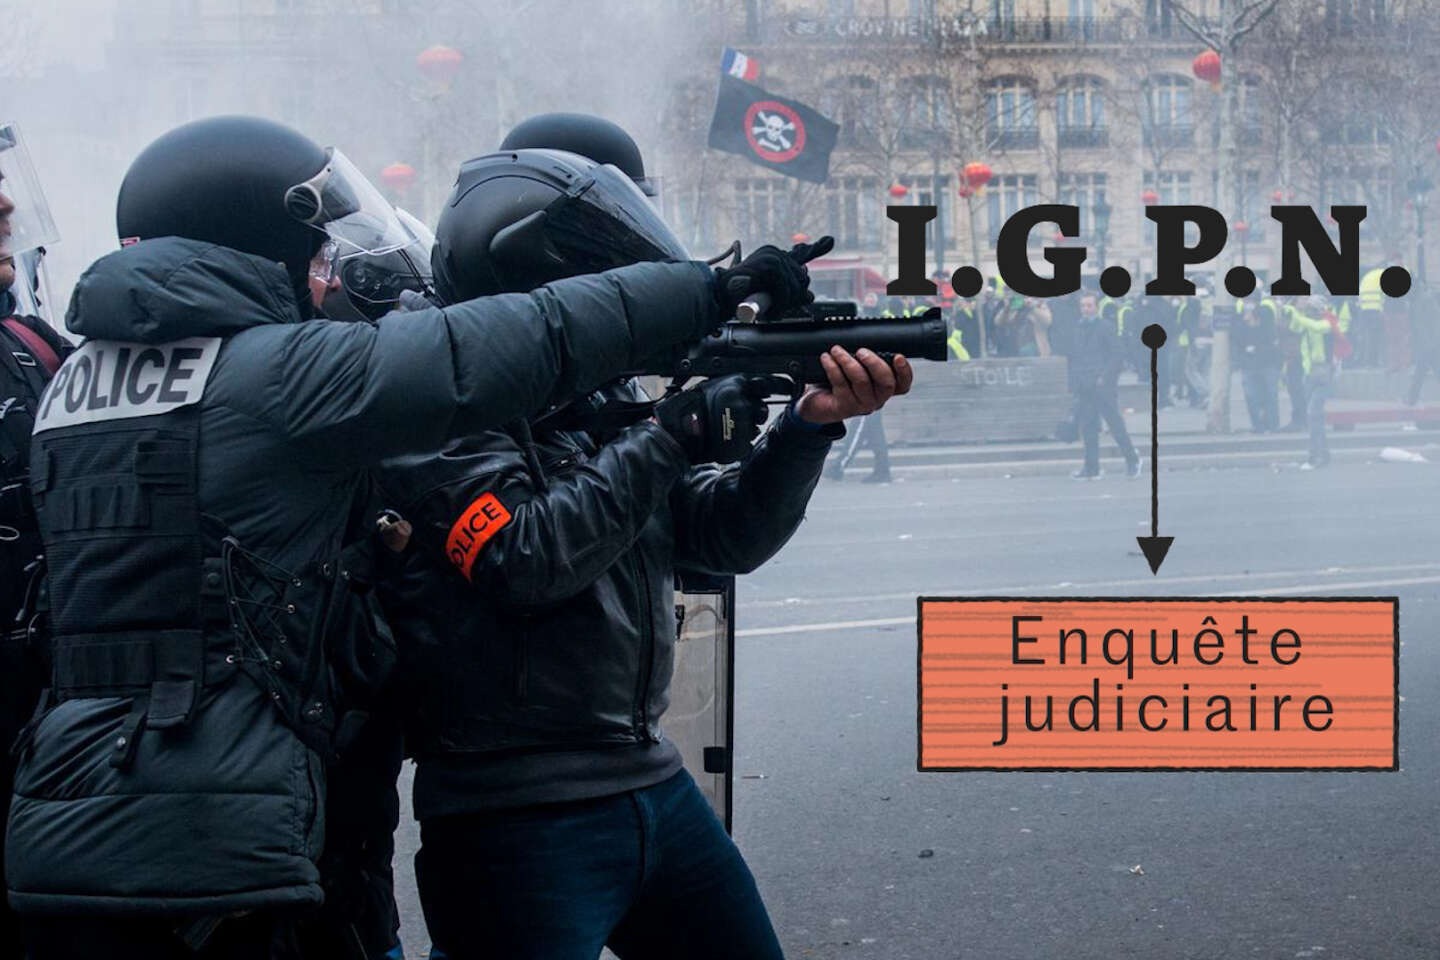 In Nantes, the IGPN seized after accusations of sexual assault during a police check